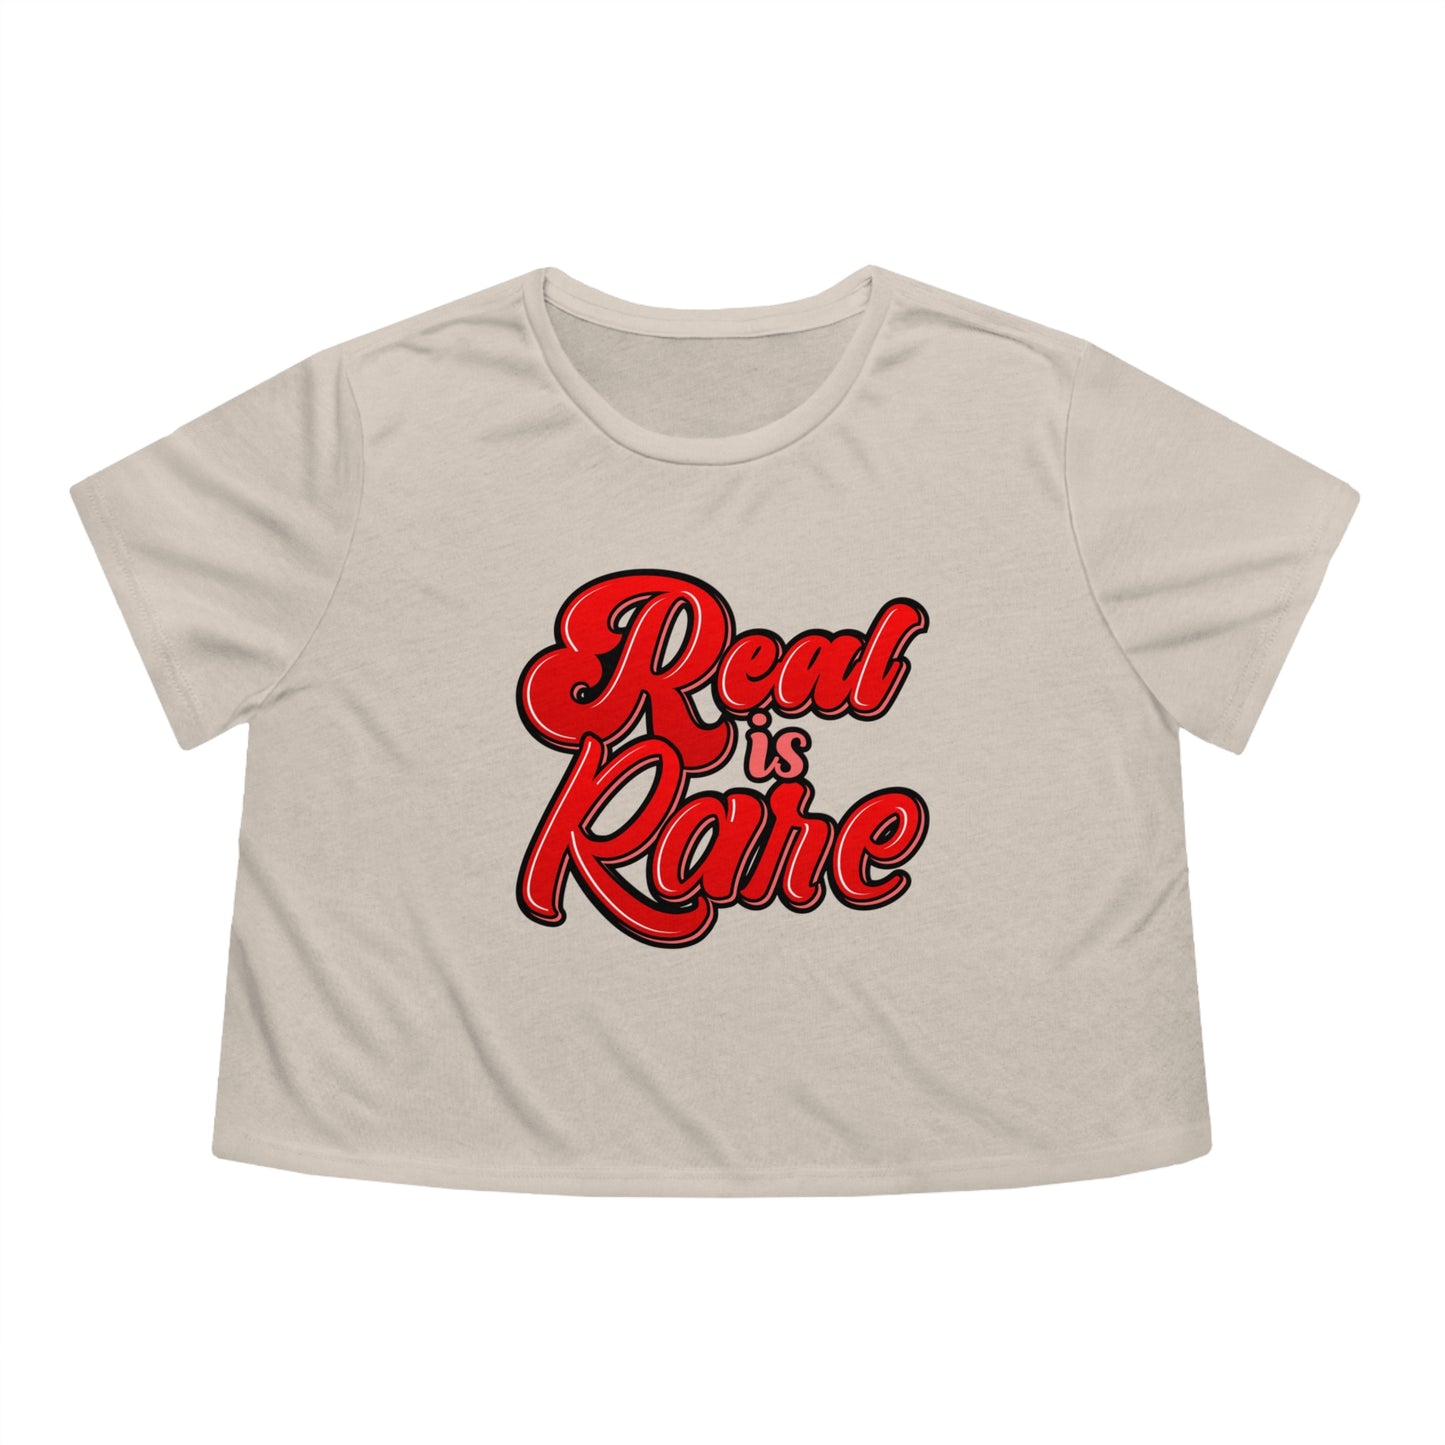 Real is rare crop top